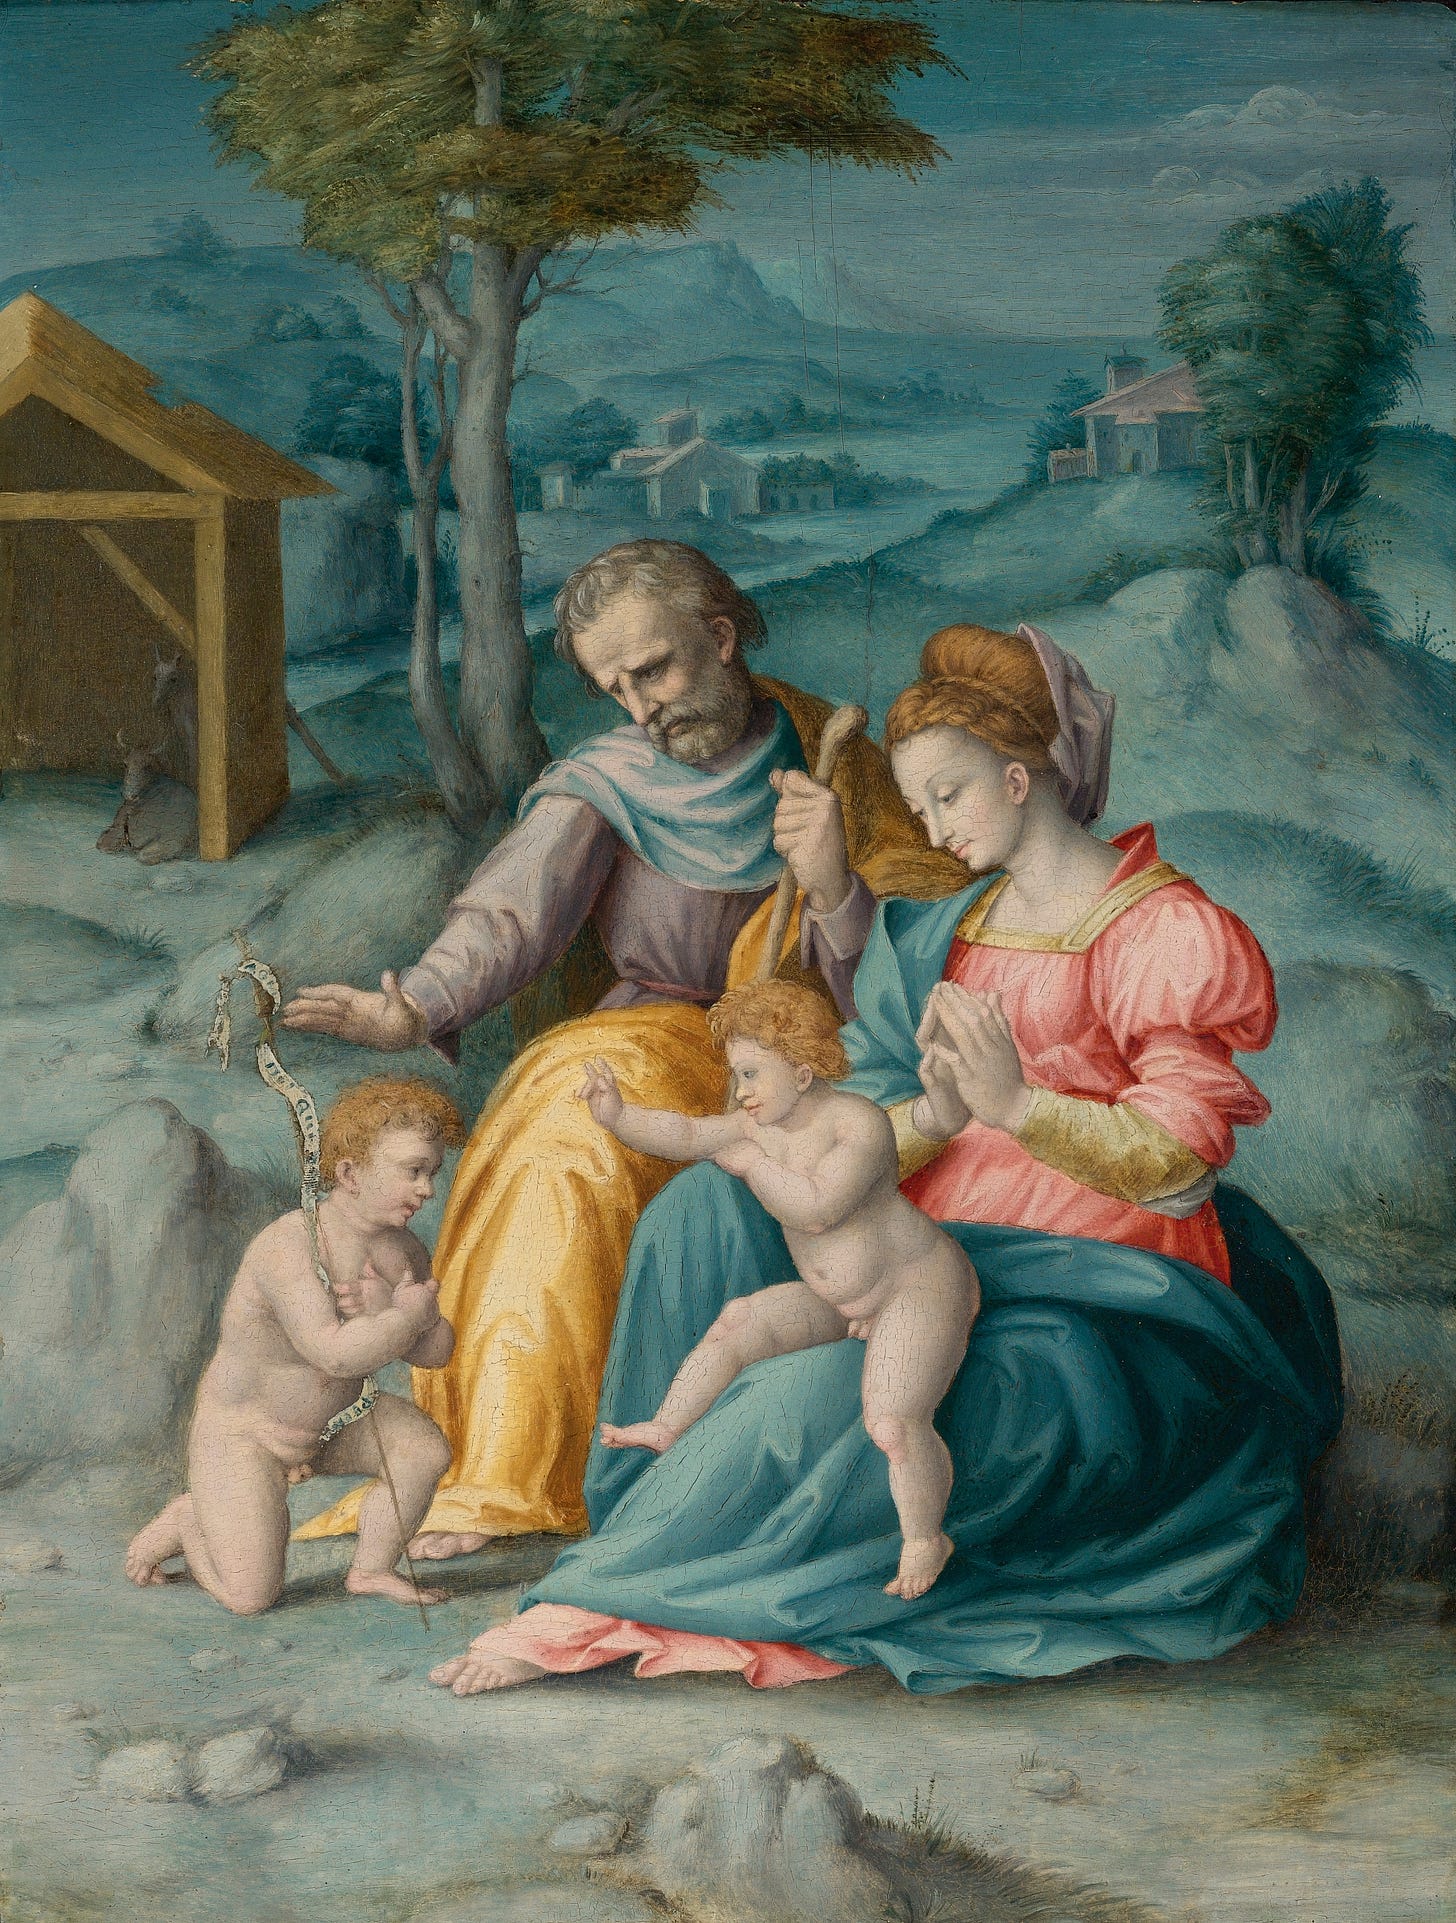 The Holy Family With the infant Saint John The Baptist by Bacchiacca (Italian, 1494 - 1557)